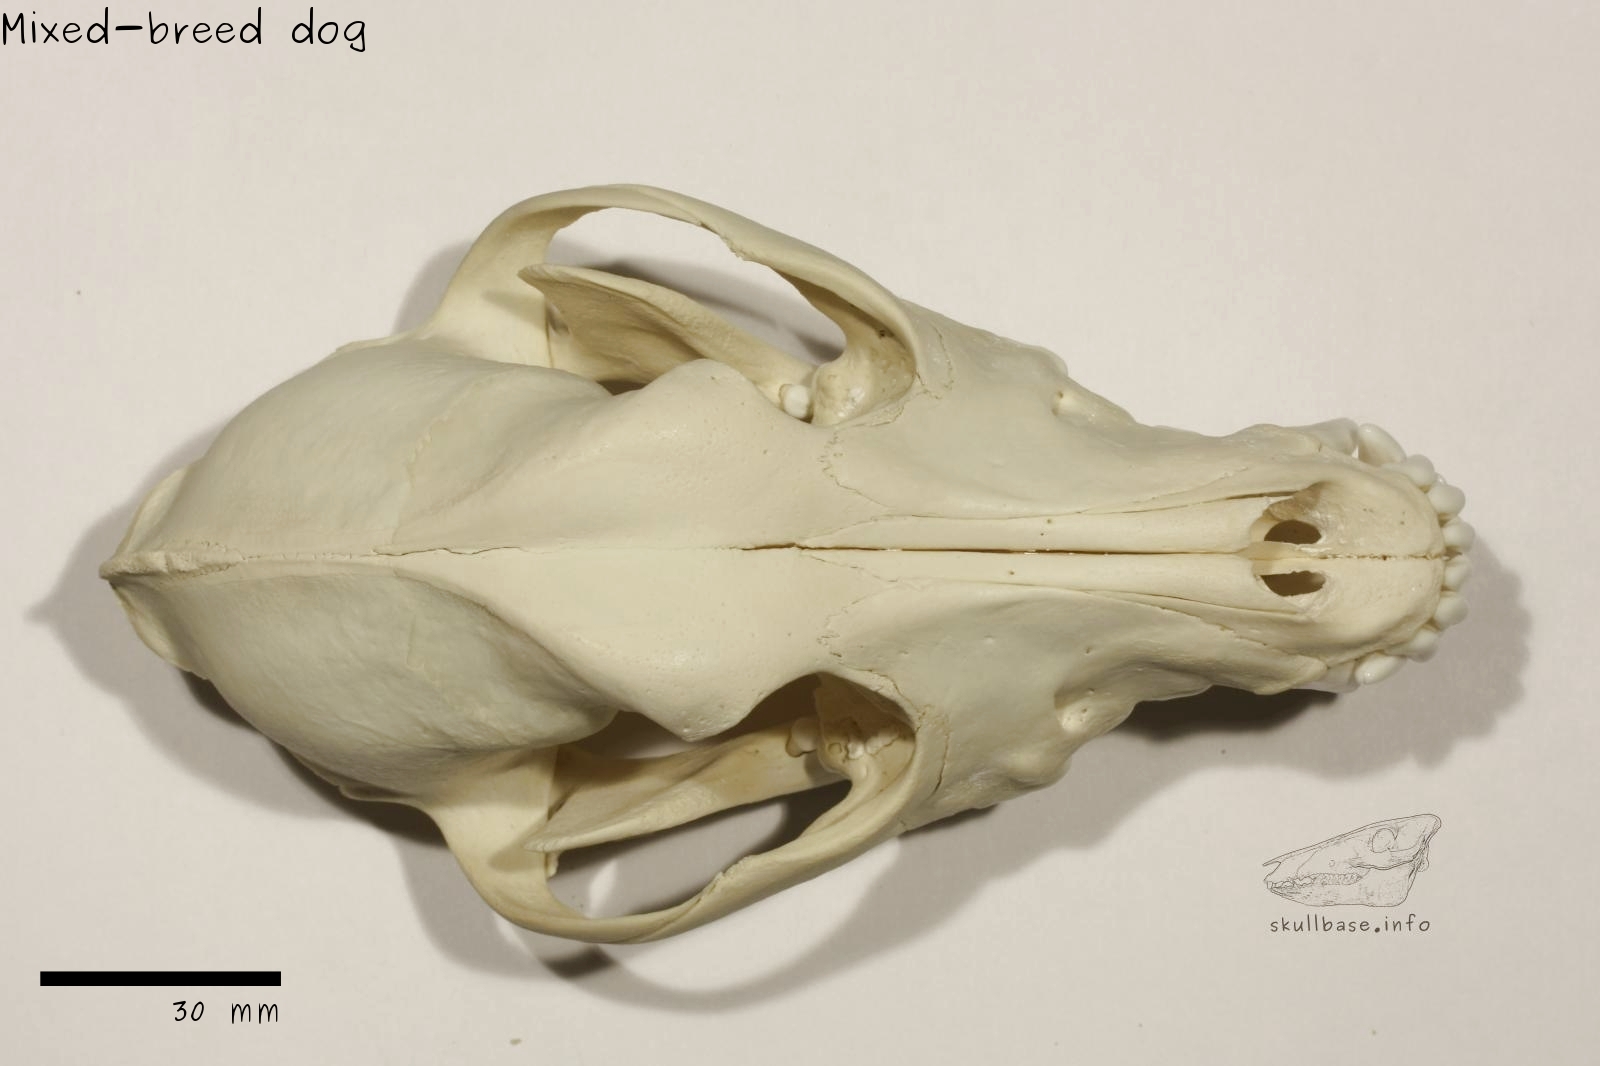 Mixed-breed dog (Canis lupus familiaris) skull dorsal view